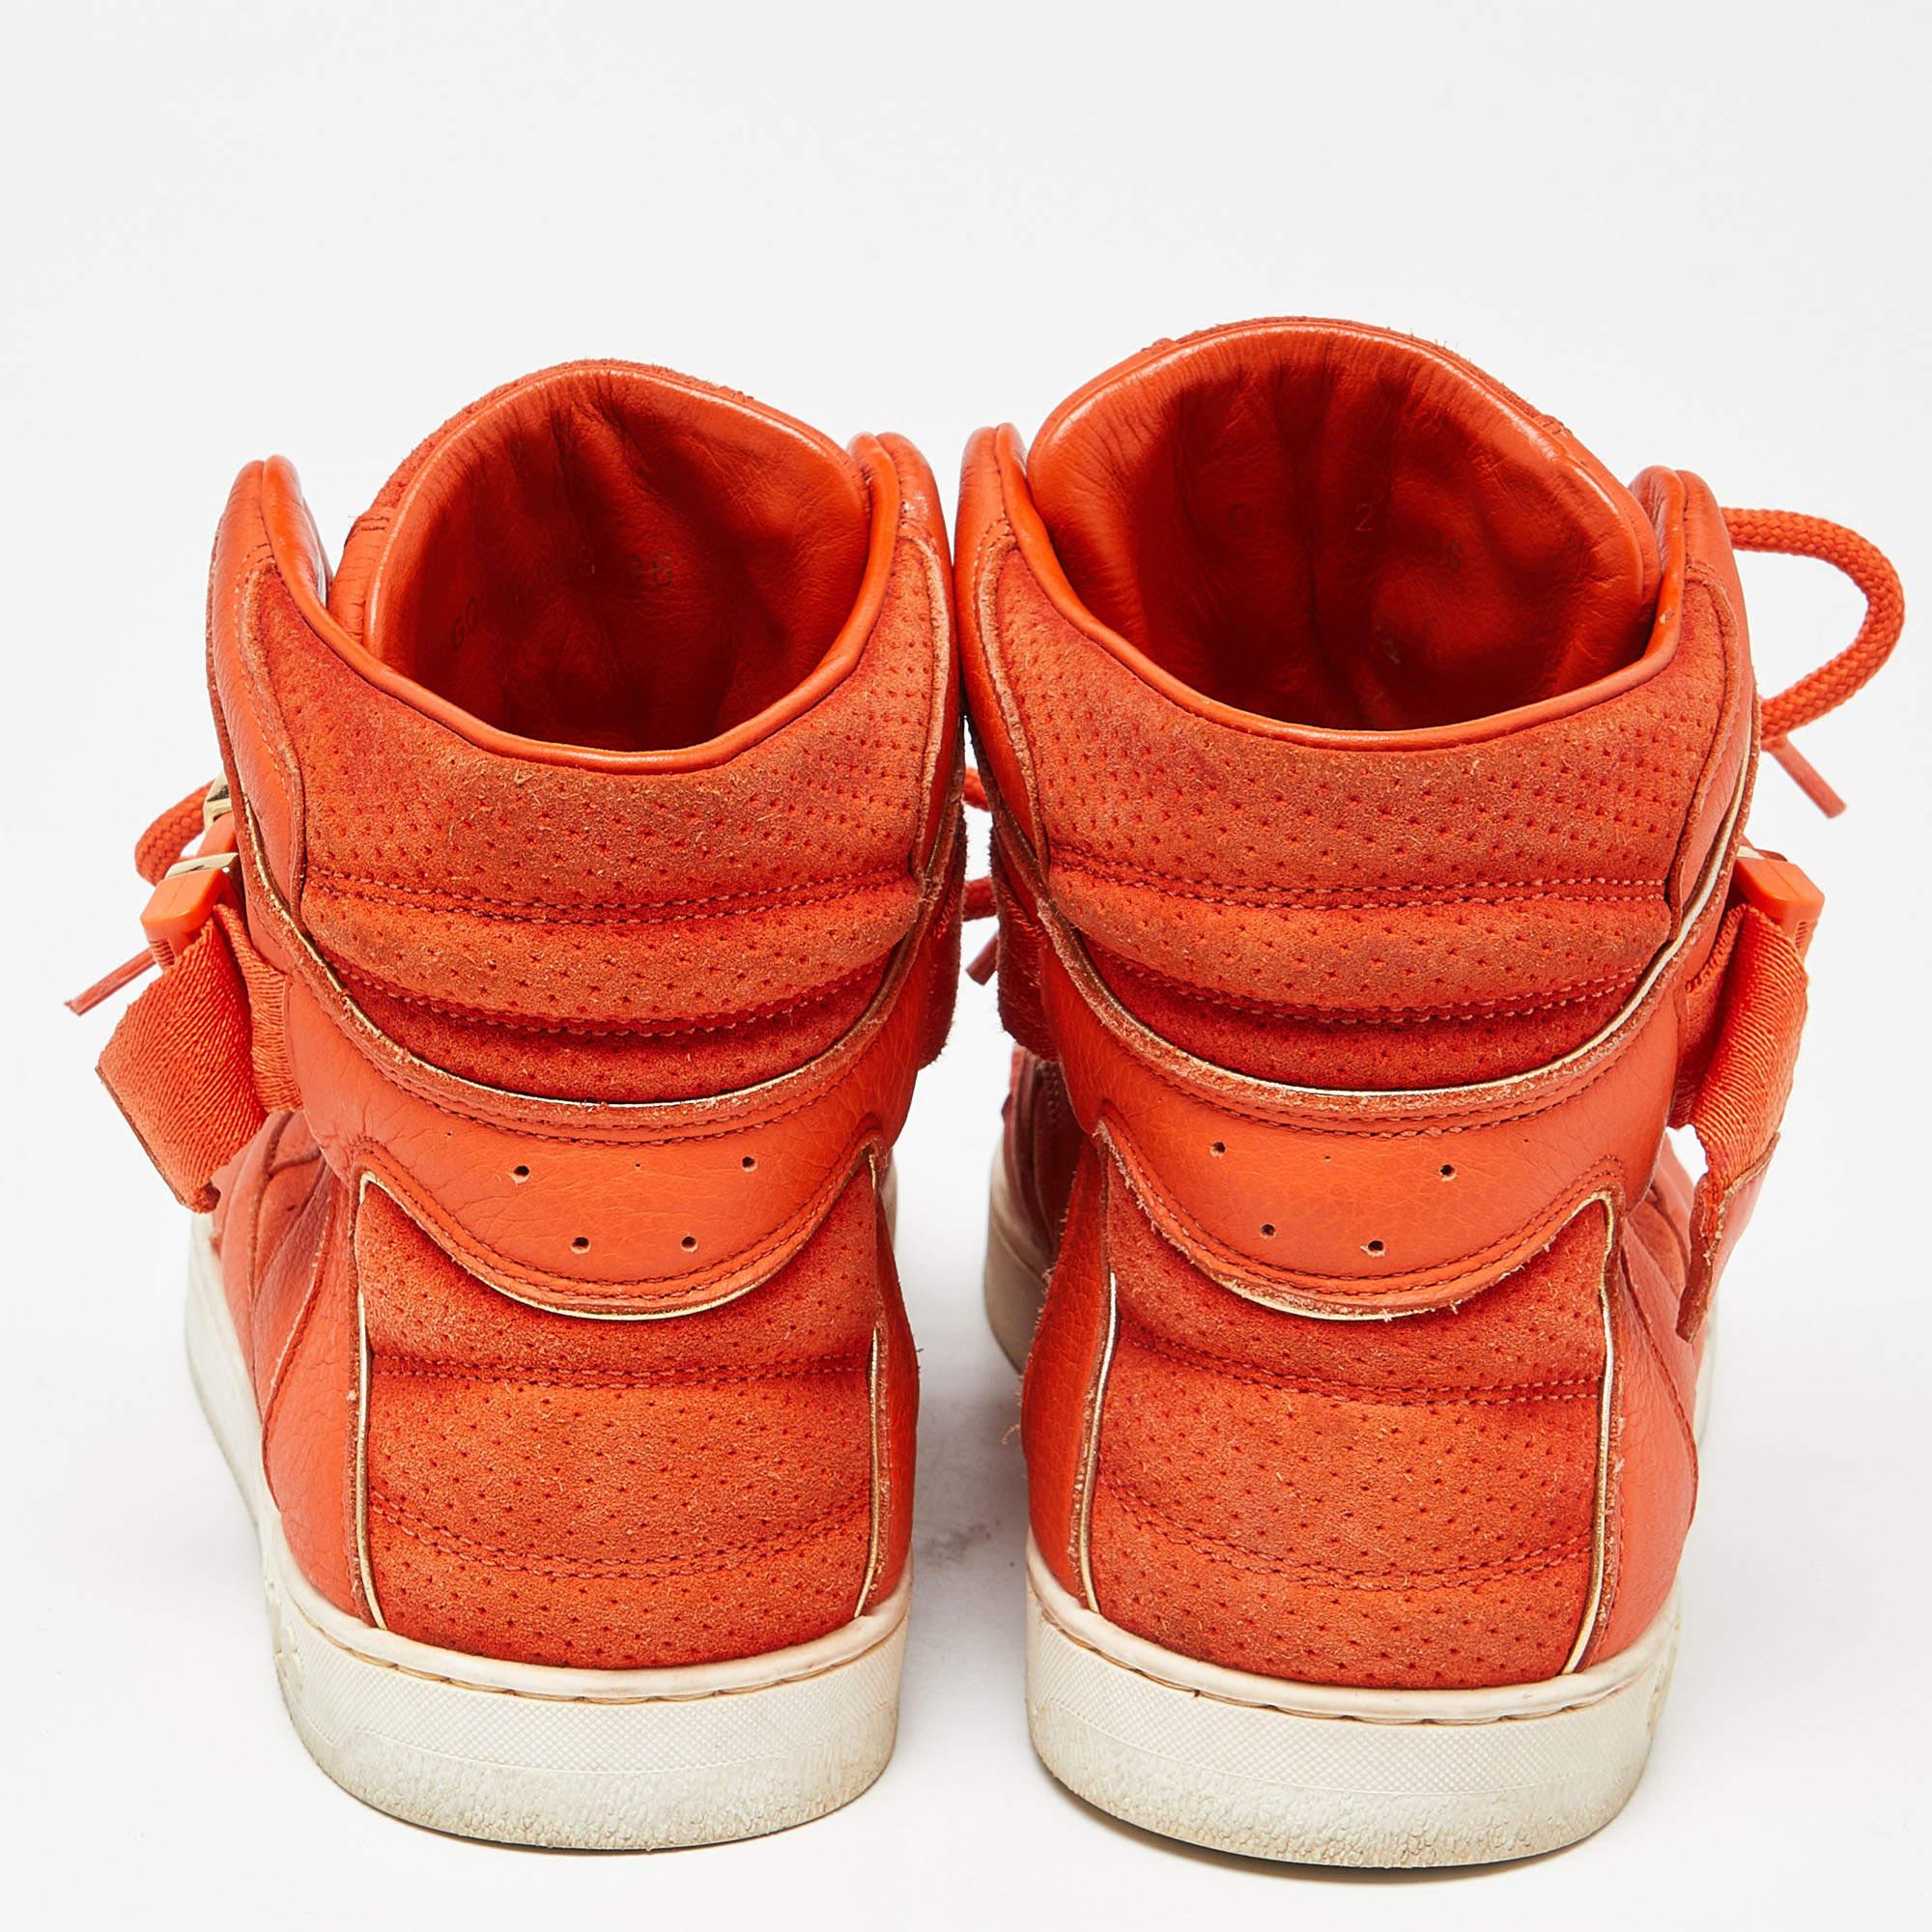 Louis Vuitton Orange Leather and Suede Slipstream High Top Sneakers Size 36 For Sale 2